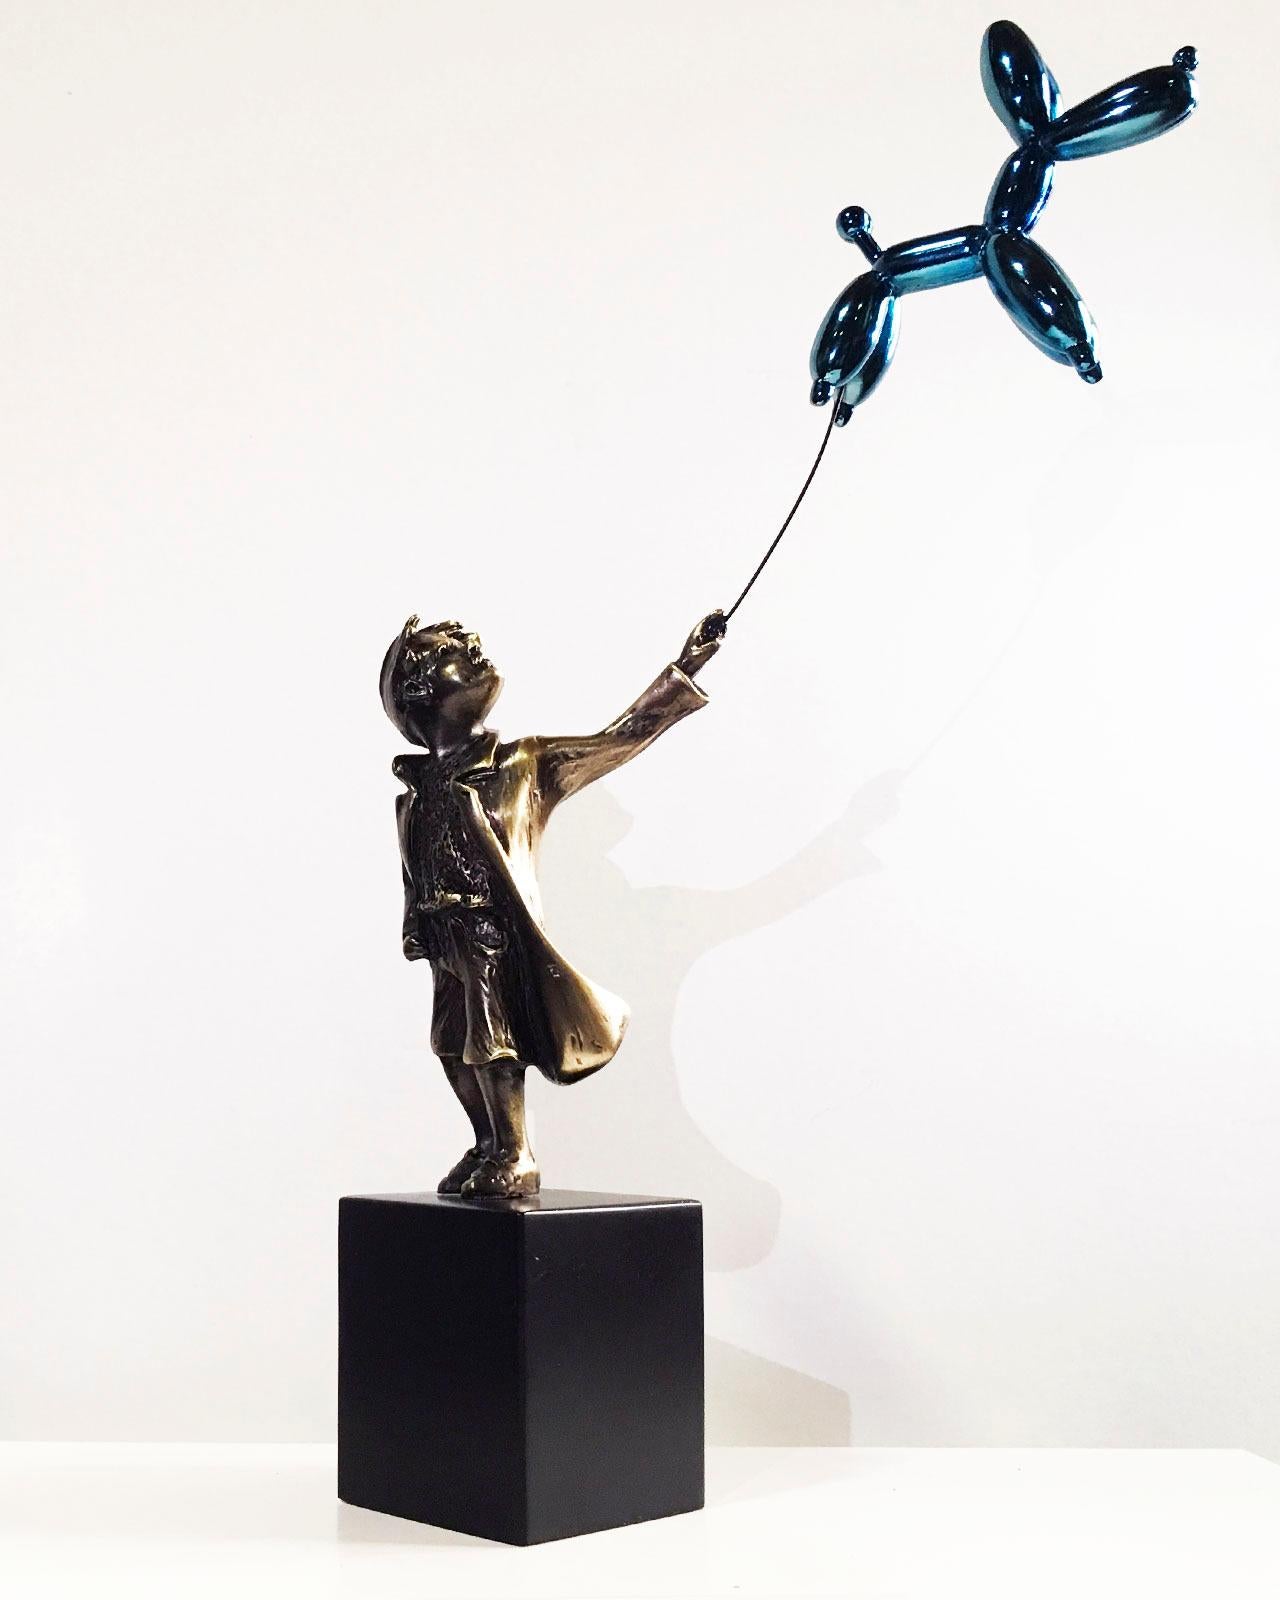 Street Art Sculpture "Child with balloon dog" by Miguel Guía.
This sculpture is made by lost wax bronze casting.
Limited edition of 299 works.
The base is included in the price.
The dimensions given include the base.
This Sculpture are copyrighted